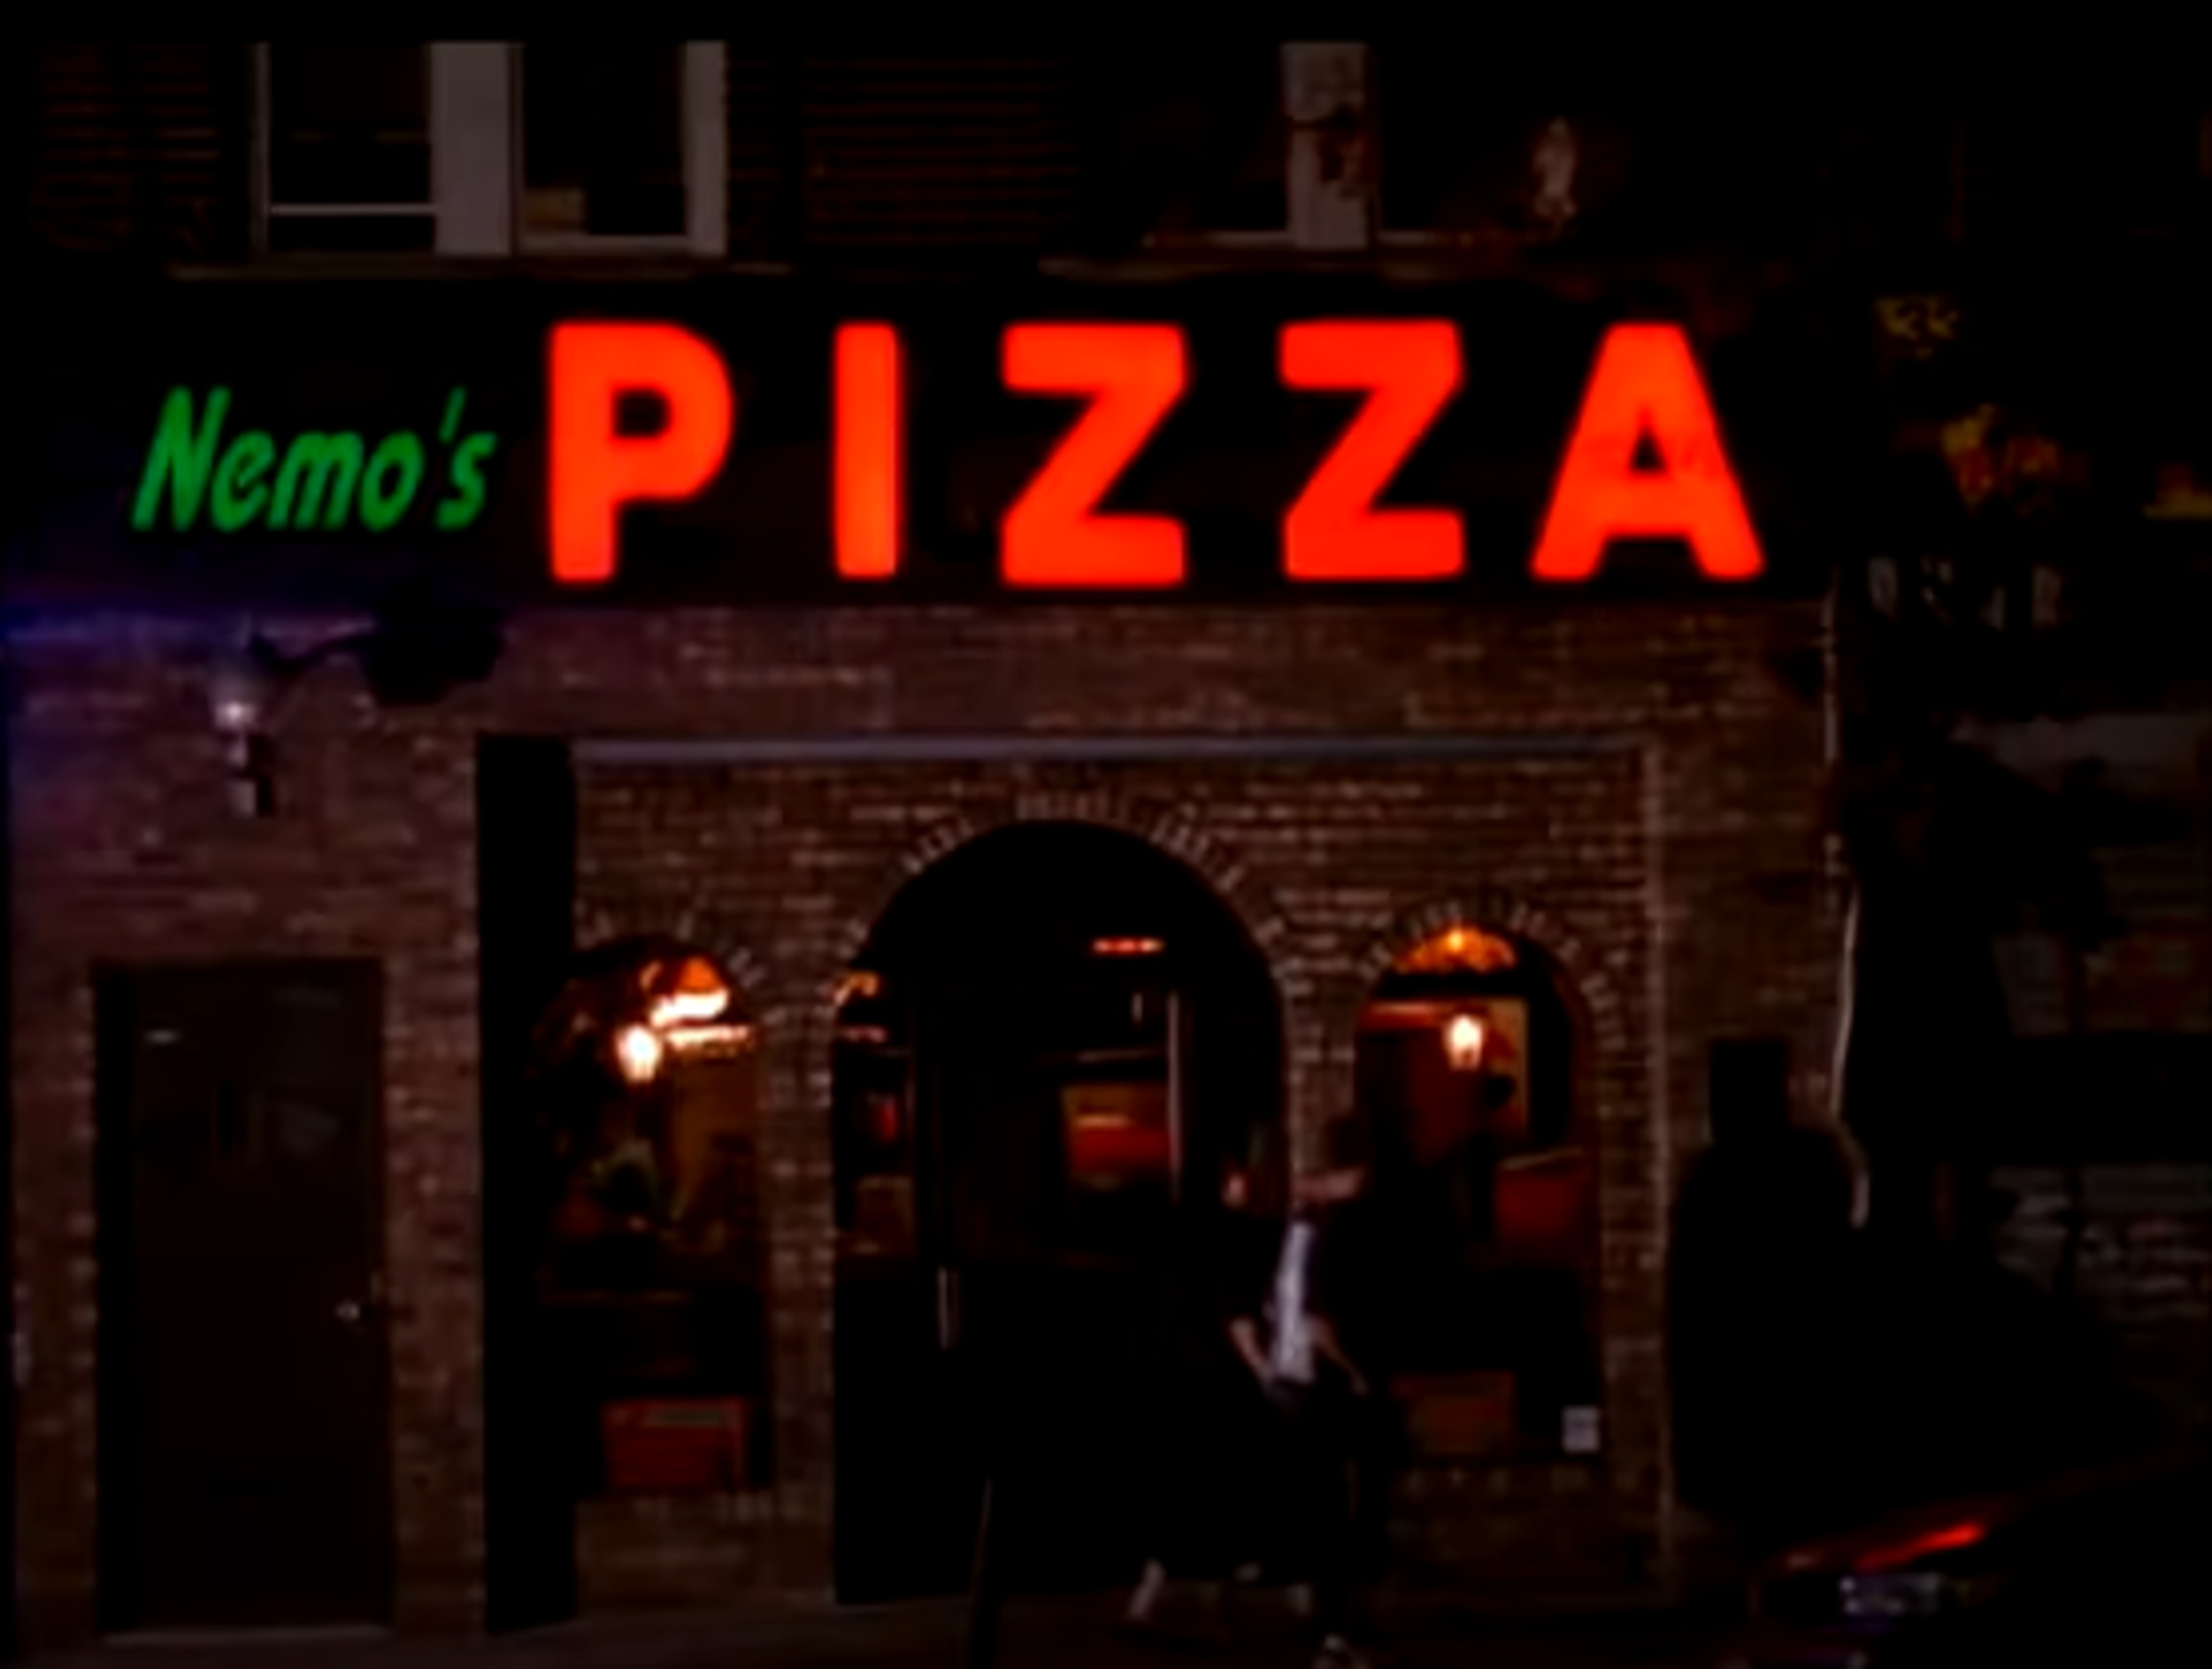 <p>A <a href="https://www.youtube.com/watch?v=iKH1mZlgJo0">favorite of the Barone family</a> eventually became Marco's Pizza. We prefer Nemo's — especially the banter between Ray (Ray Romano) and Nemo himself. Nemo wasn't the most hygienic person, which is why it was joked throughout the run of the series that the restaurant, even when Marco took over, wasn't exactly up to health code standards. Still, the pizza and pasta were good enough to keep the Barones coming back.  </p><p>You may also like: <a href='https://www.yardbarker.com/entertainment/articles/20_movie_and_tv_characters_who_had_it_worse_than_their_book_counterpart_030724/s1__40048048'>20 movie and TV characters who had it worse than their book counterpart</a></p>